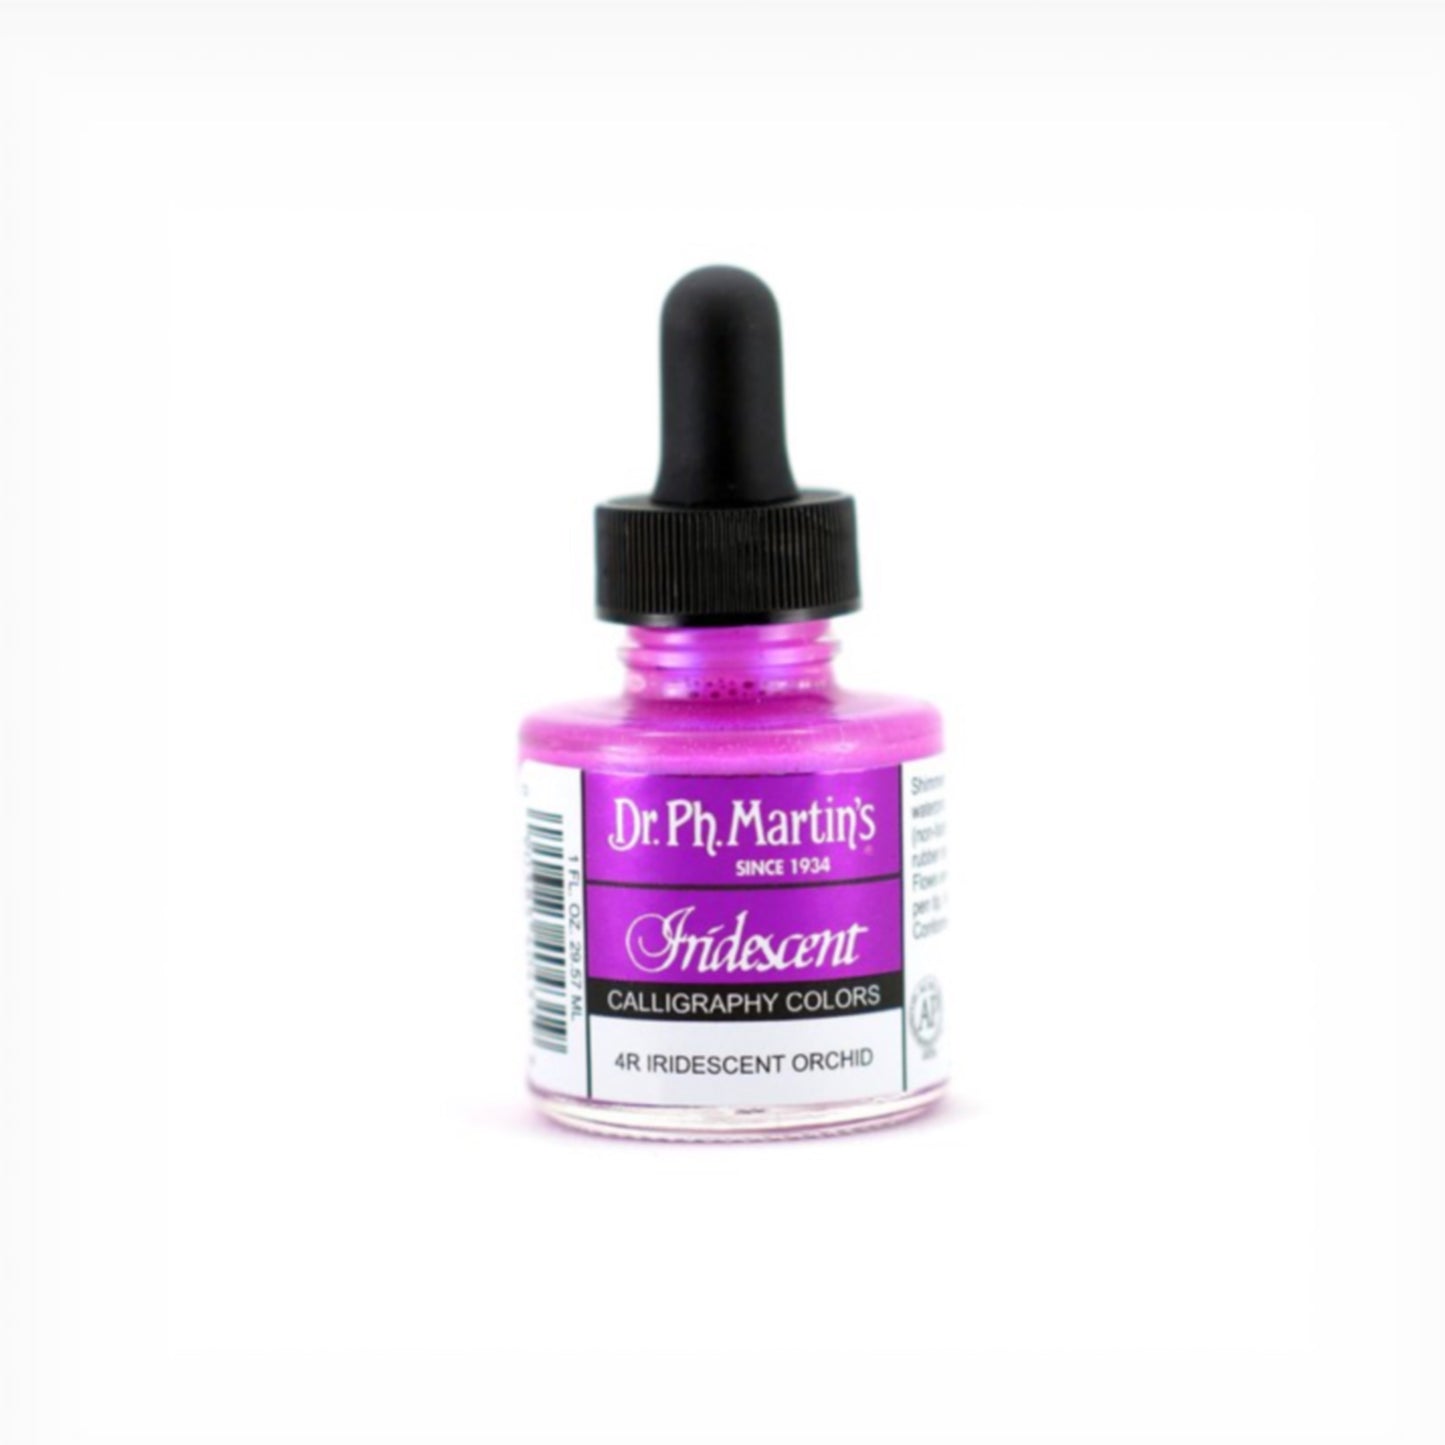 Dr. Ph. Martin's Iridescent Calligraphy Colors - Orchid by Dr. Ph. Martin’s - K. A. Artist Shop